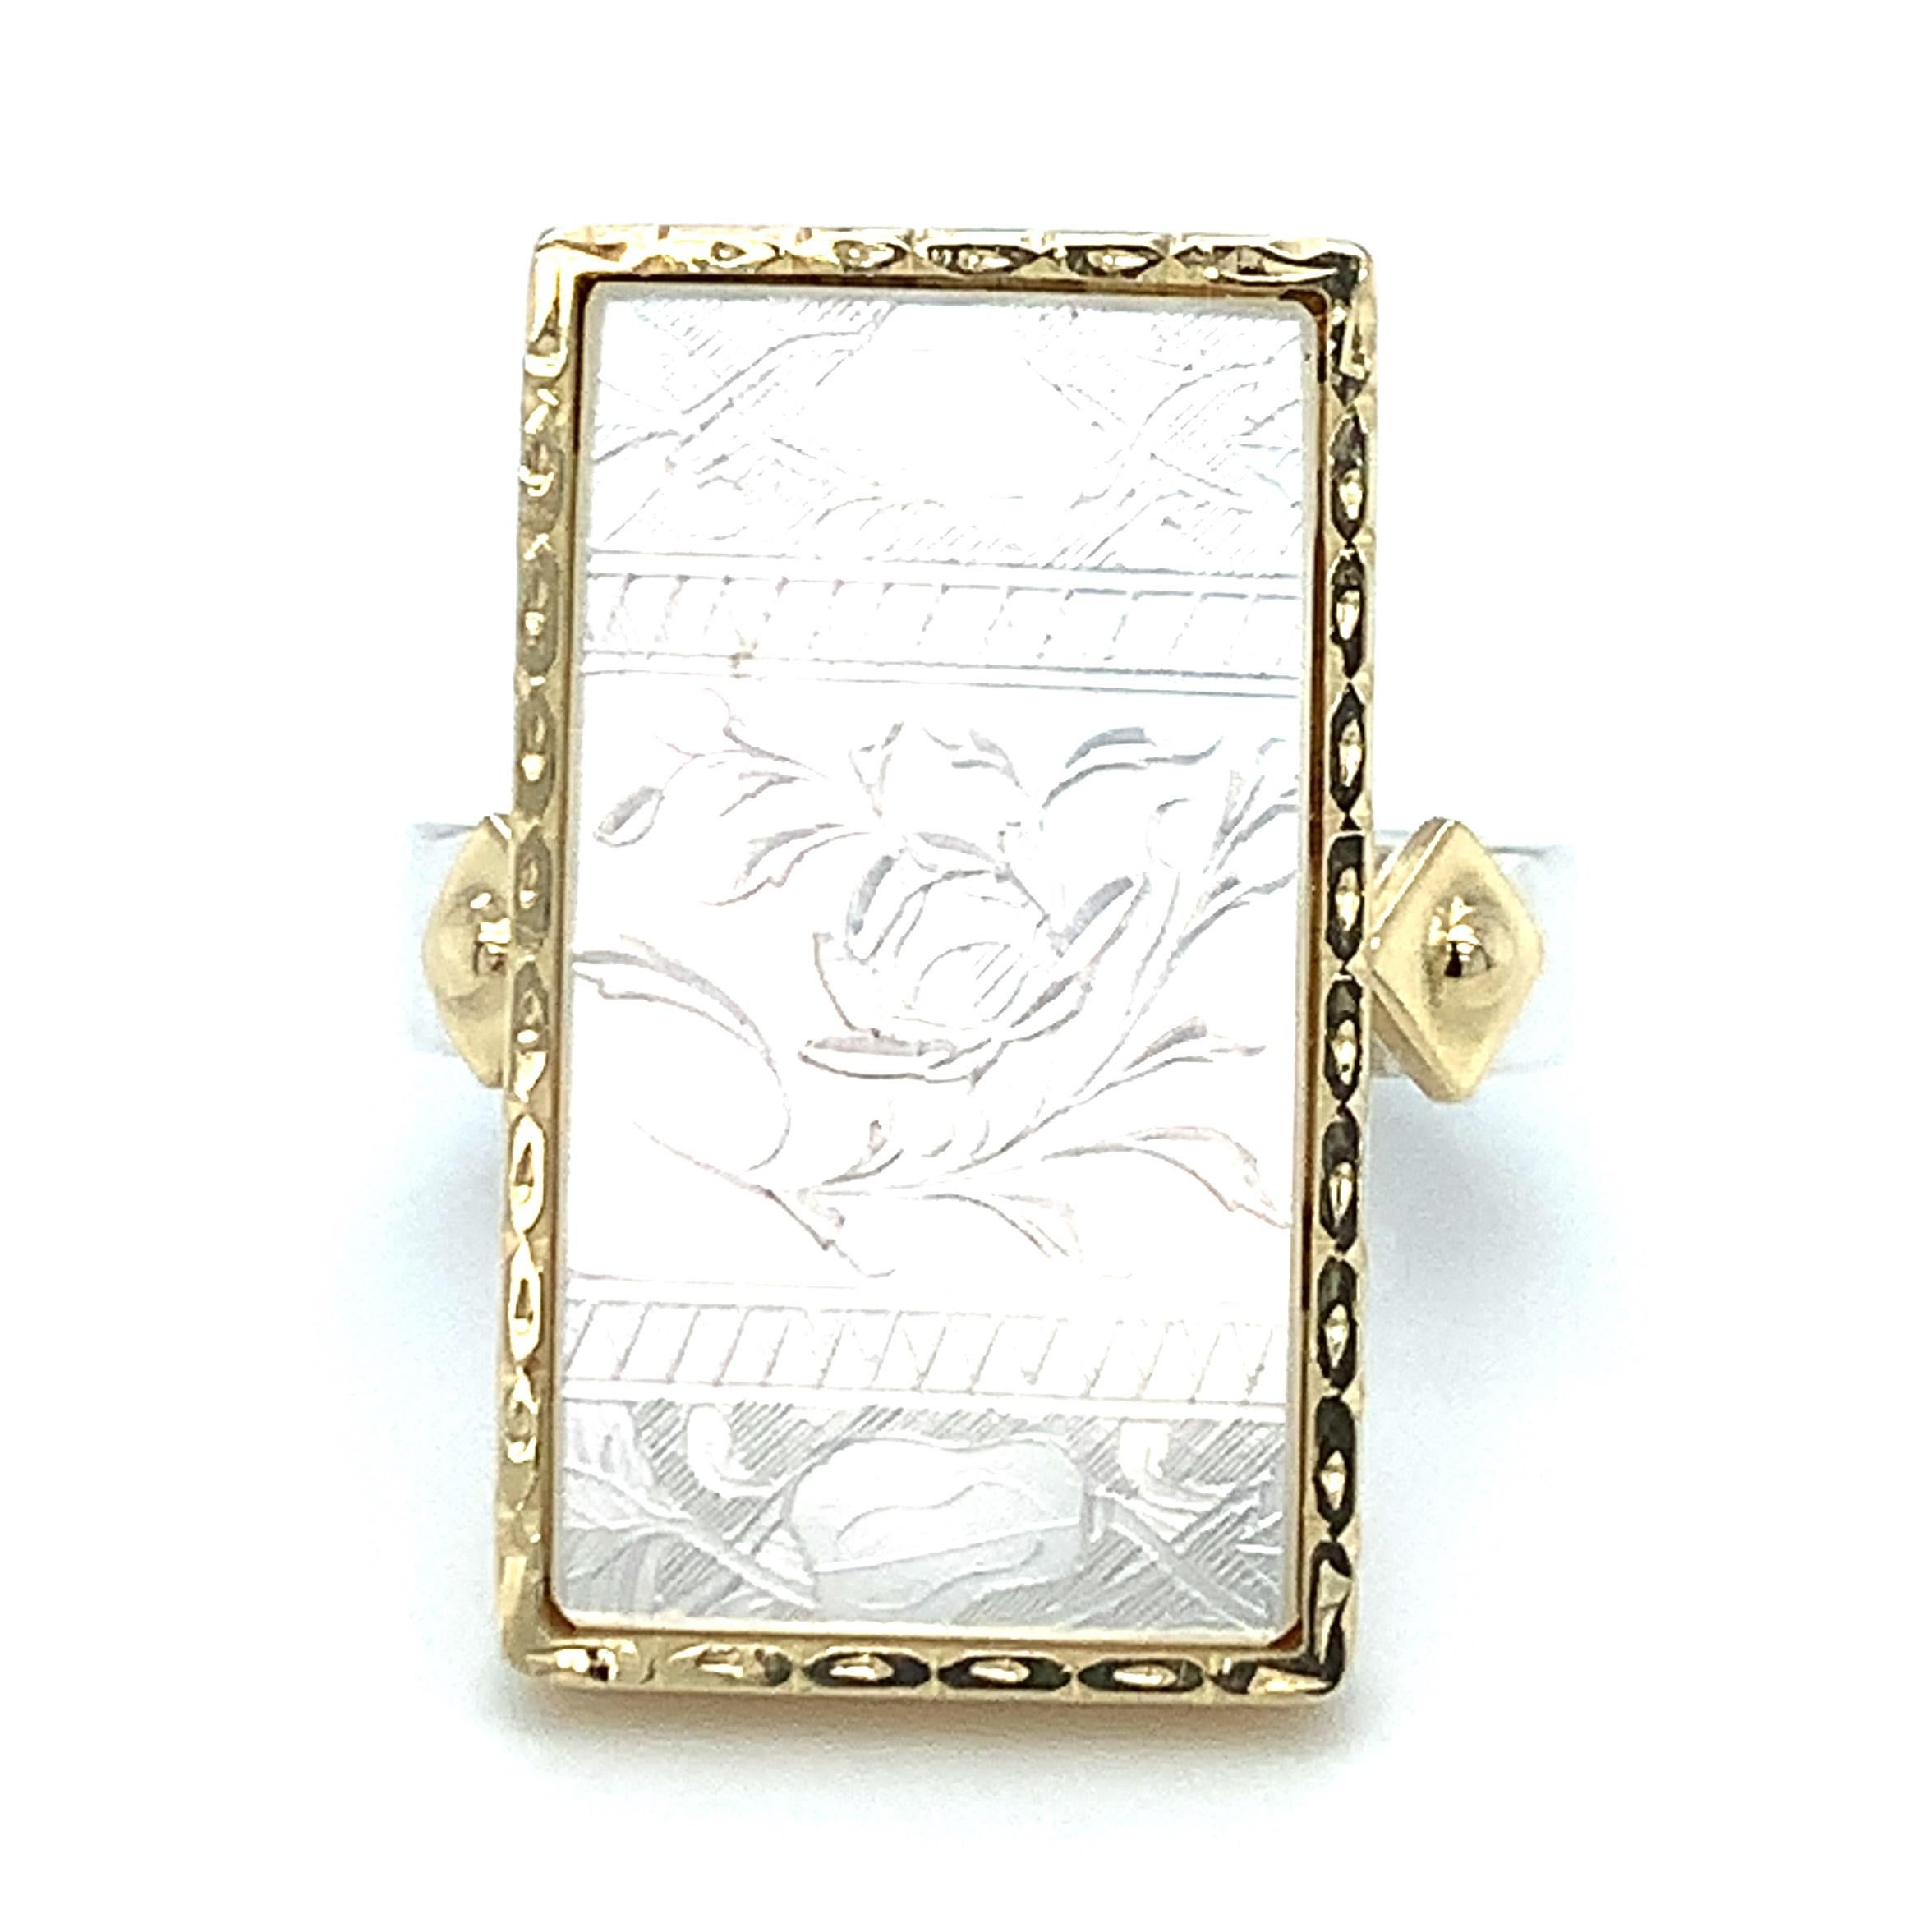 This ring features an antique, mother-of-pearl Chinese gambling counter with motifs dating back to the 18th century. Counters such as this were originally carved in China for export to Britain, where the British would use them much like we use poker